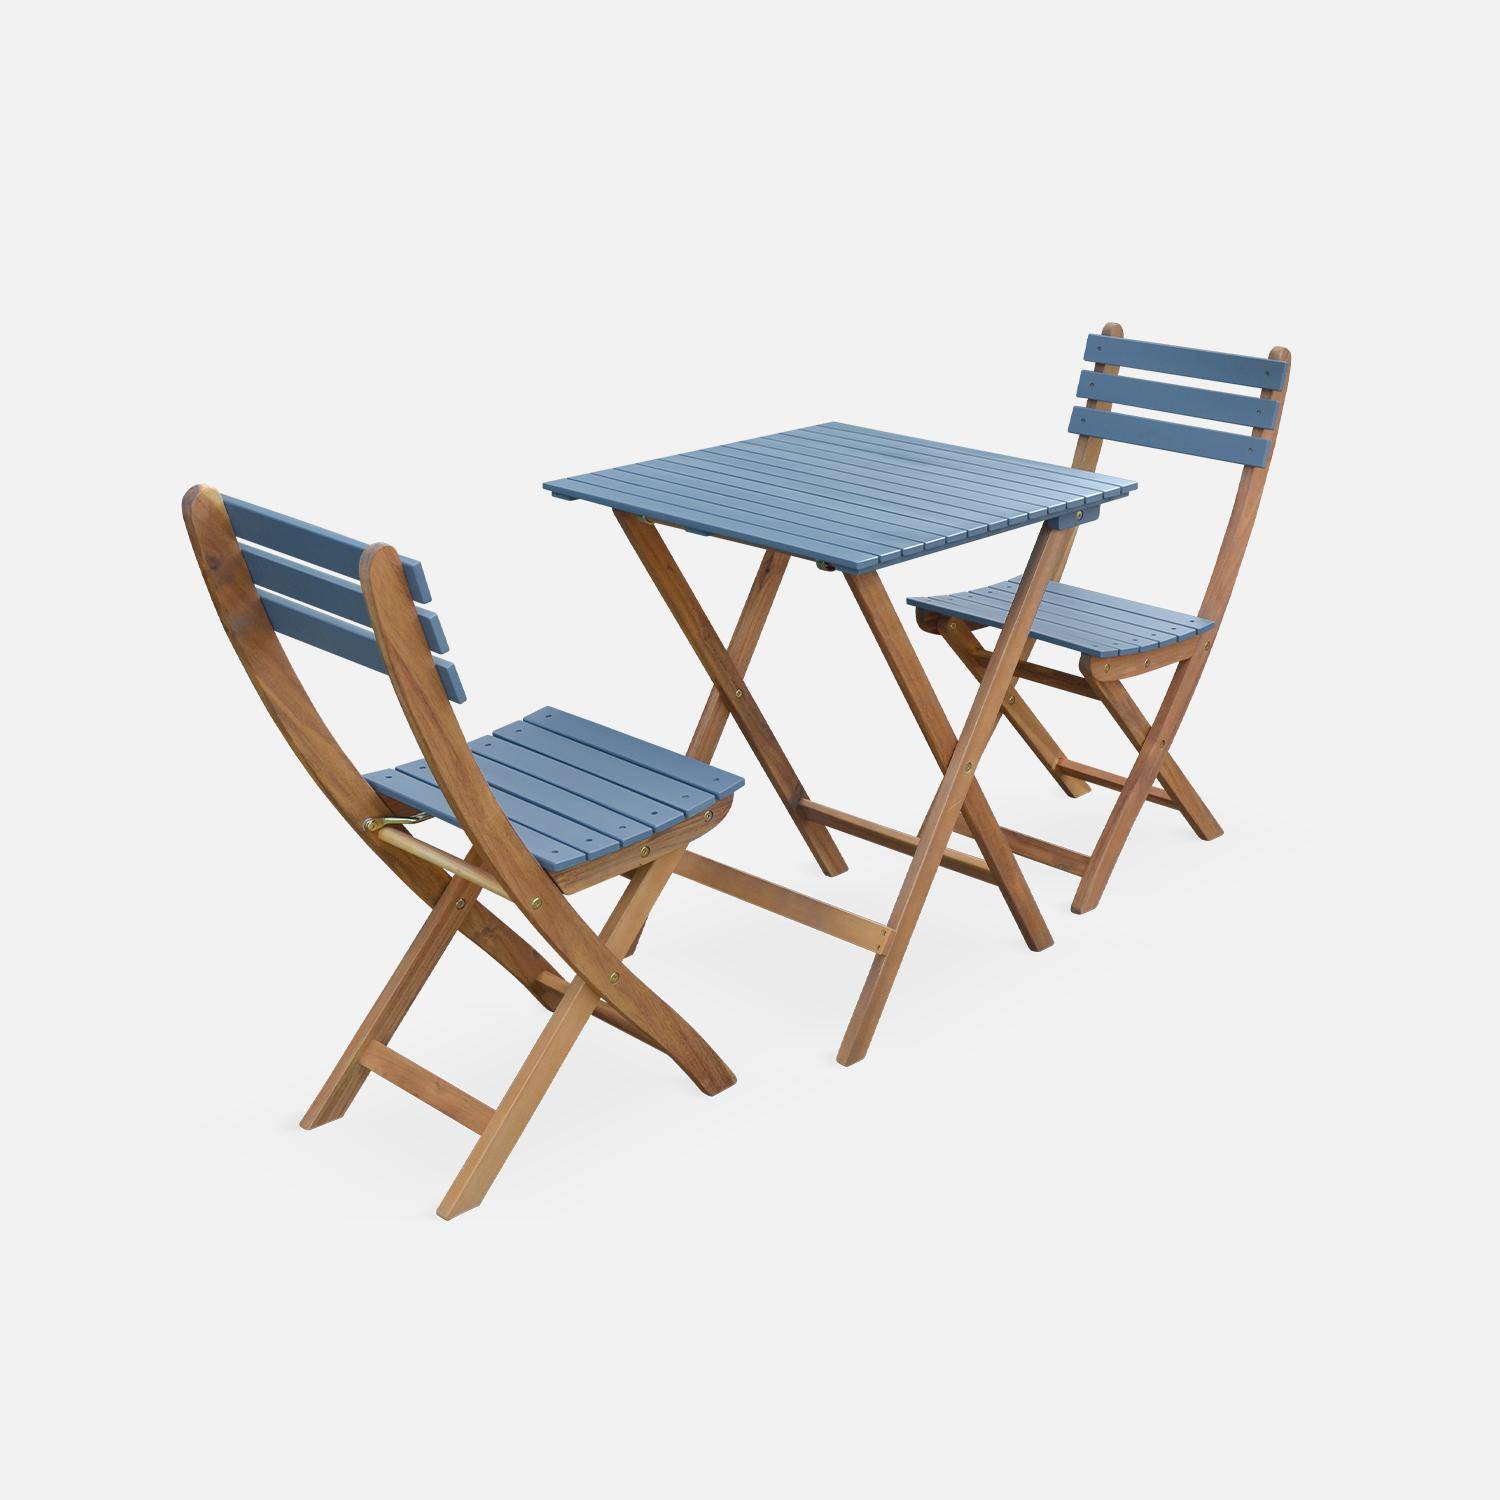 2-seater foldable wooden bistro garden table with chairs, 60x60cm - Barcelona - Grey Blue Photo4